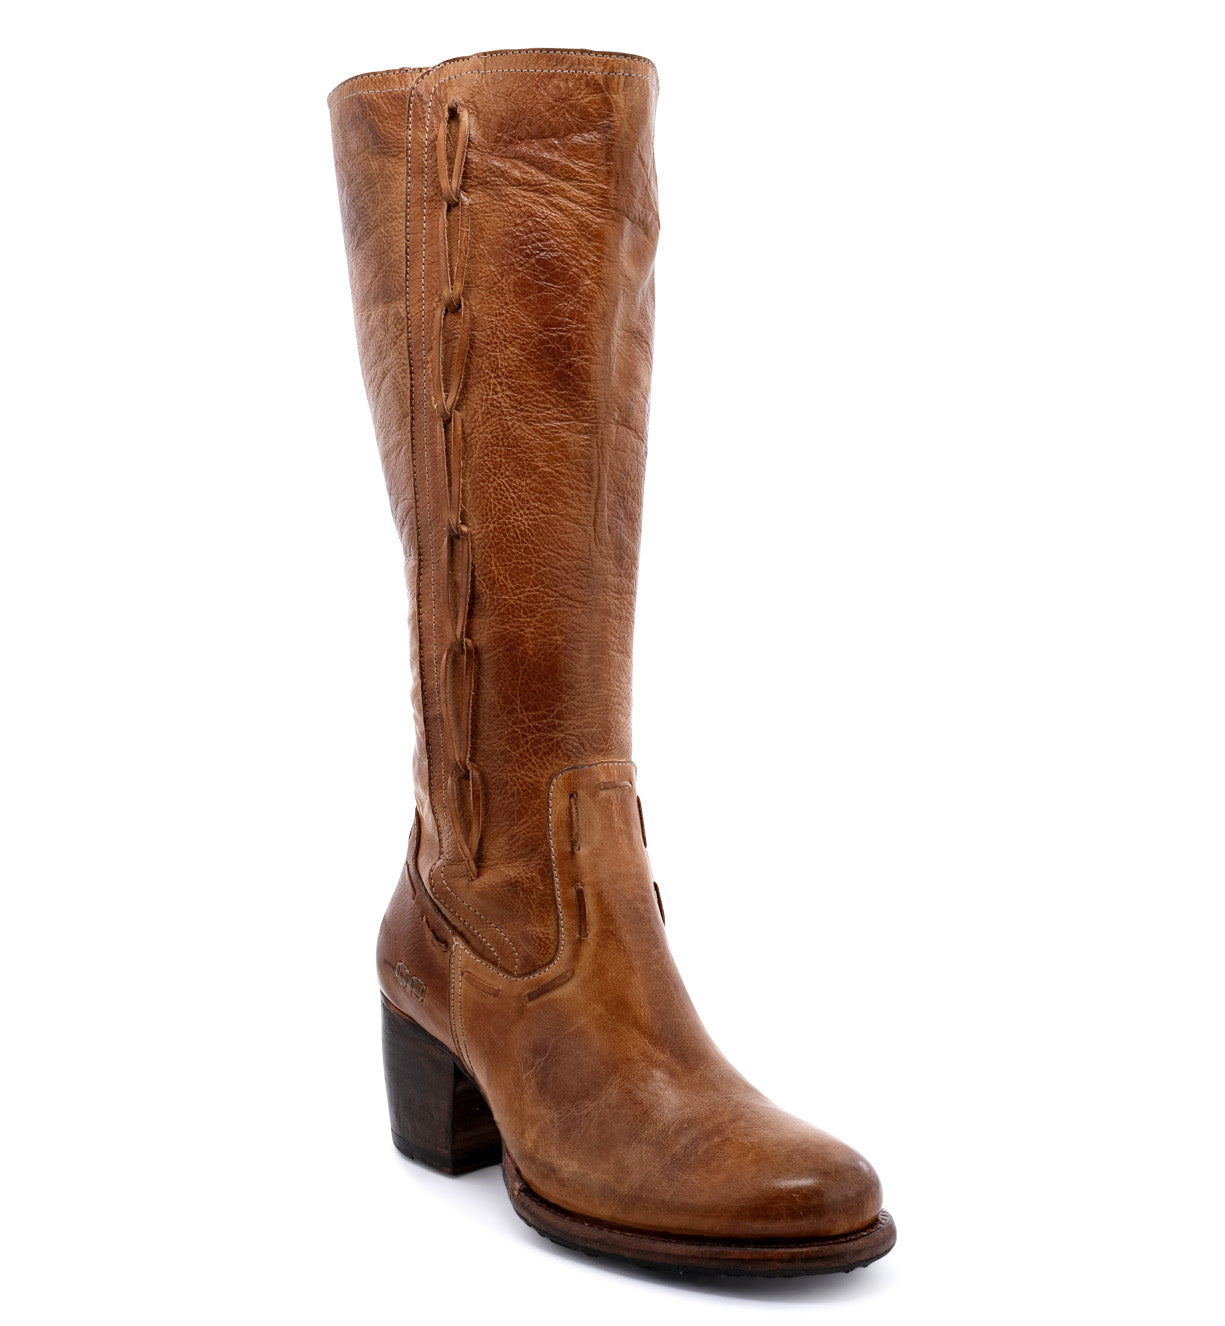 A women's tan leather Fate boot with a zipper on the side, made by Bed Stu.